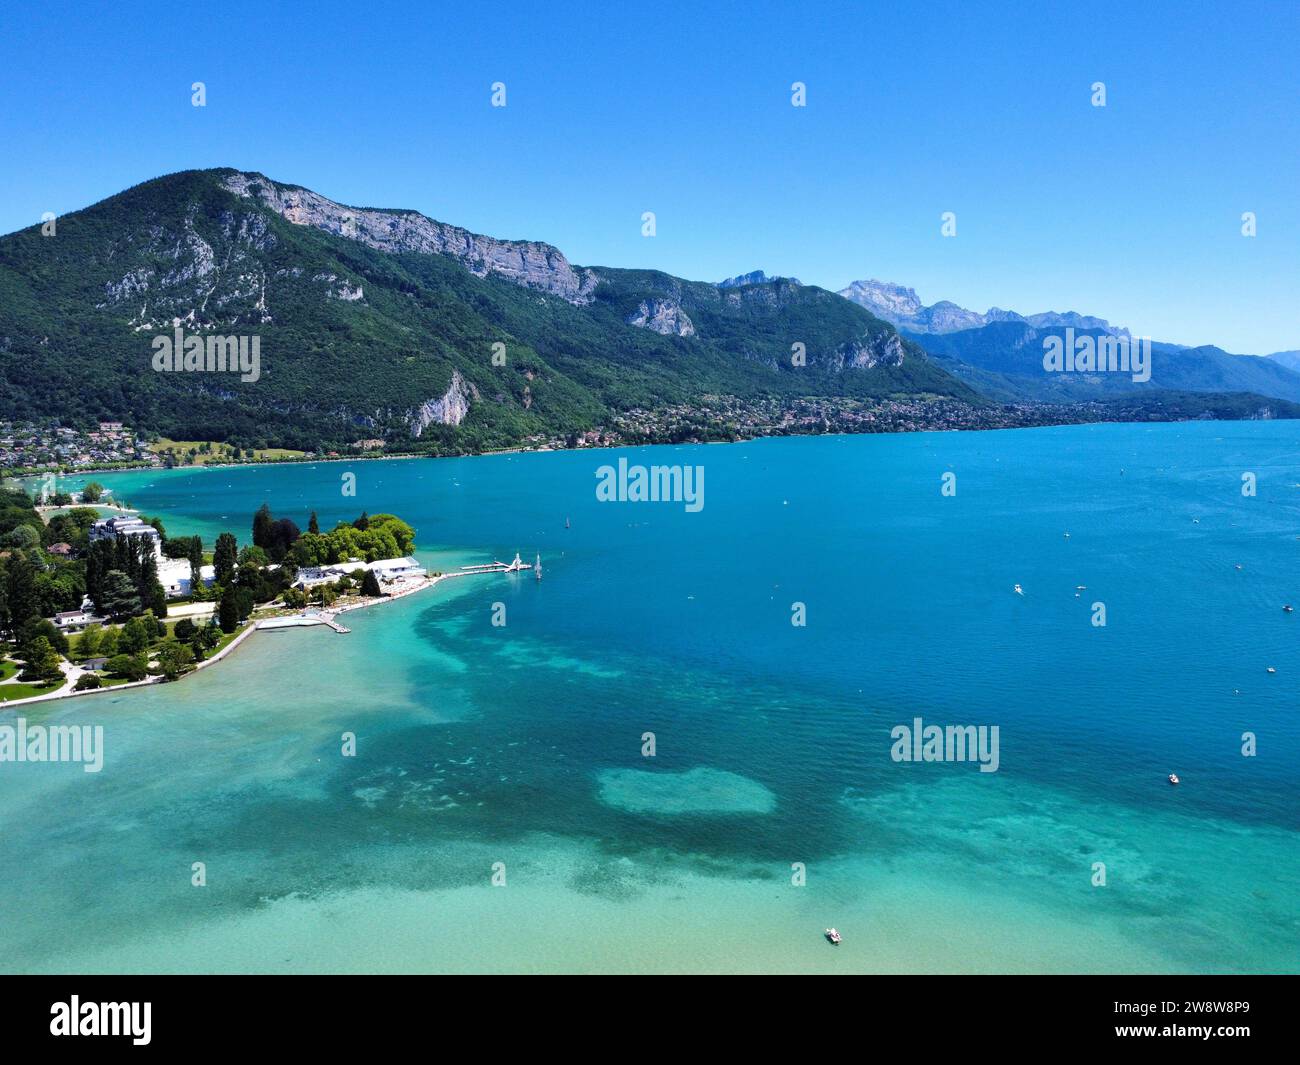 Drone photo Annecy lake, Lac d'Annecy France Europe Stock Photo